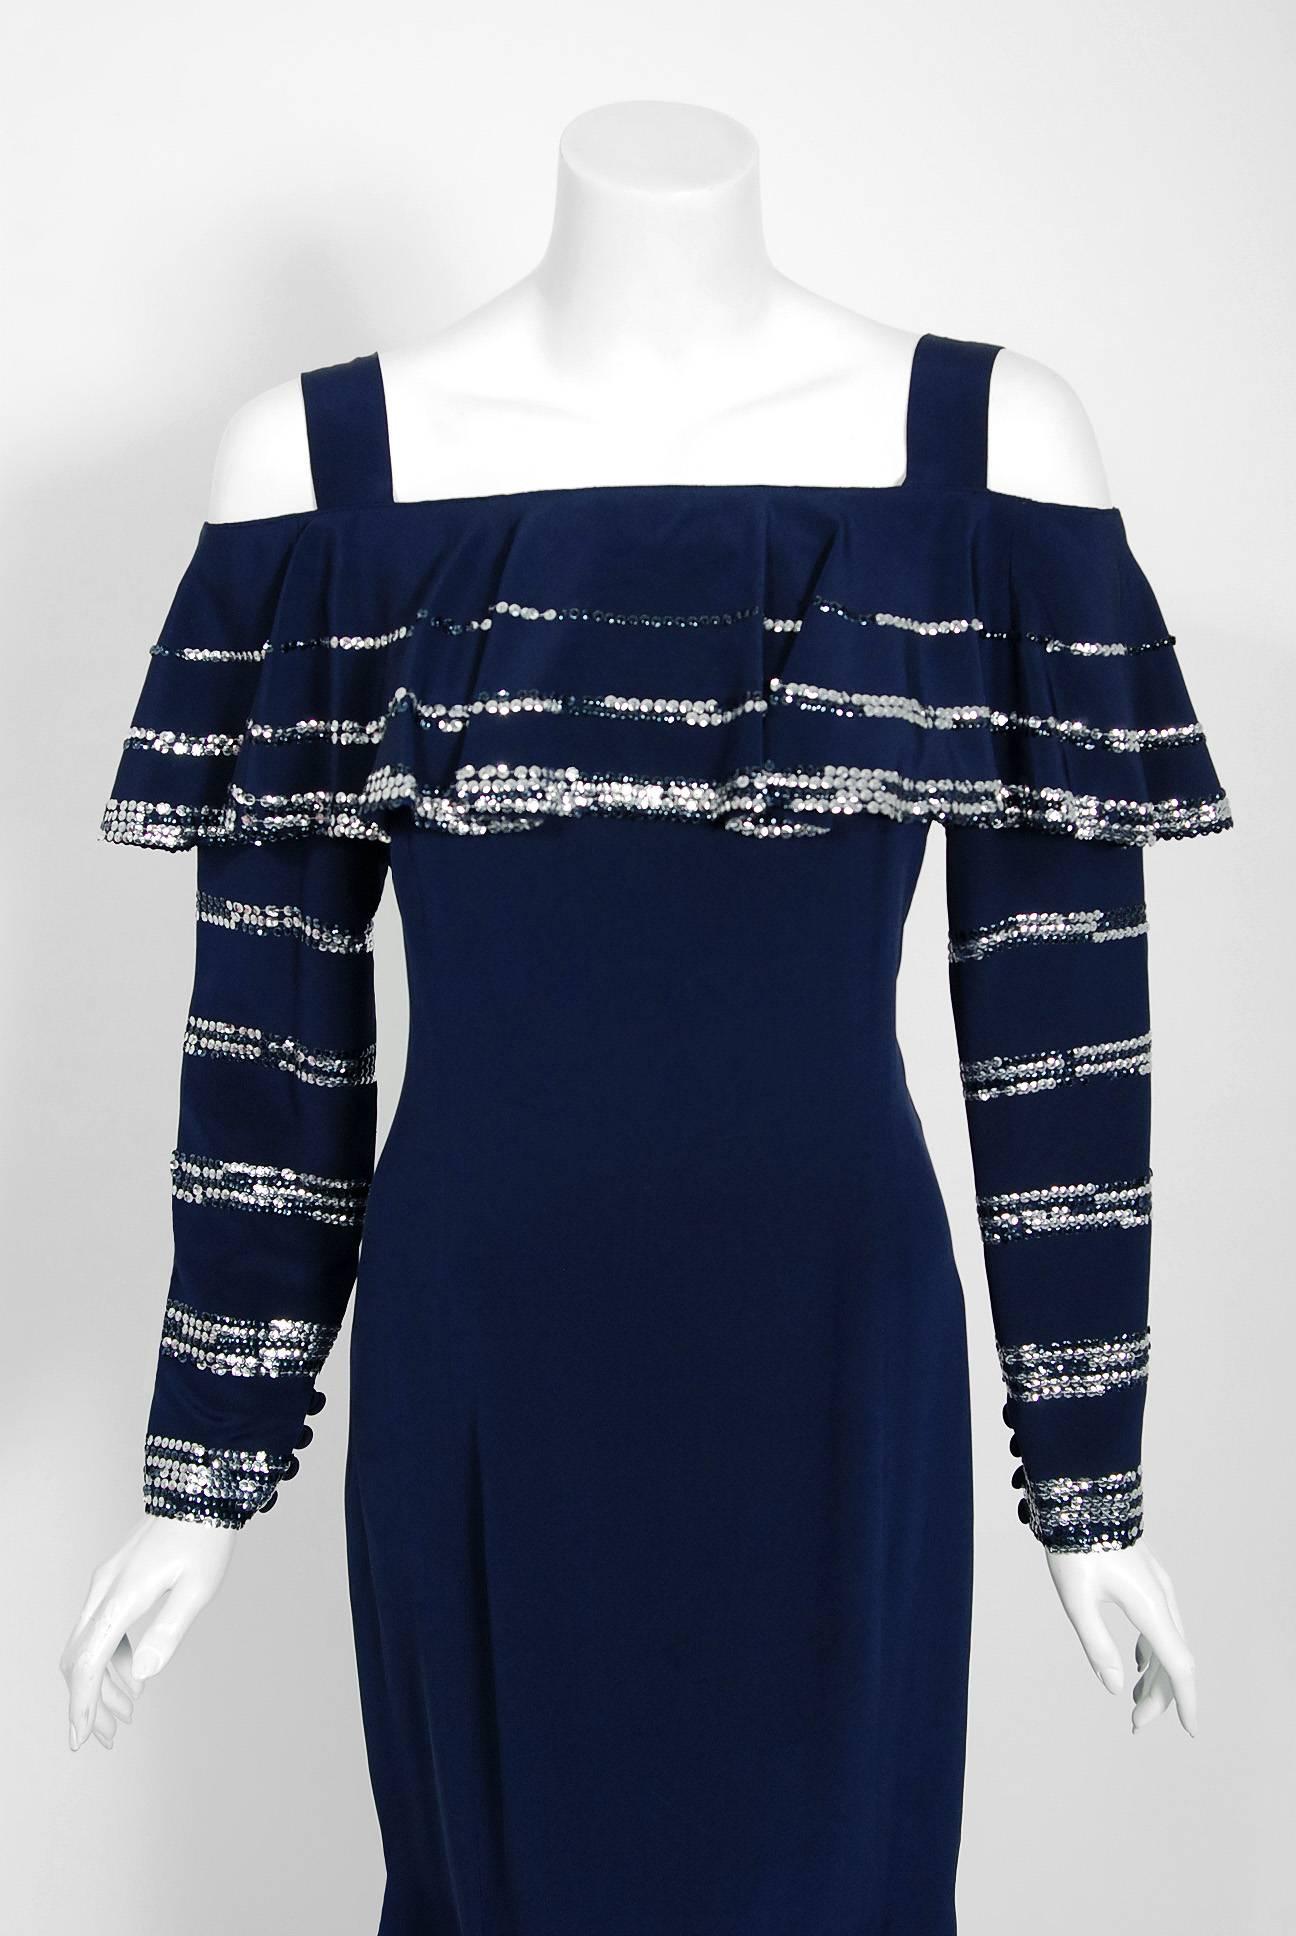 A breathtaking Karl Lagerfeld for Chloe navy-blue silk bohemian glam dress dating back to the mid 1970's. He uses an ingenious ruffle technique which really gives the garment so much depth and texture. The 